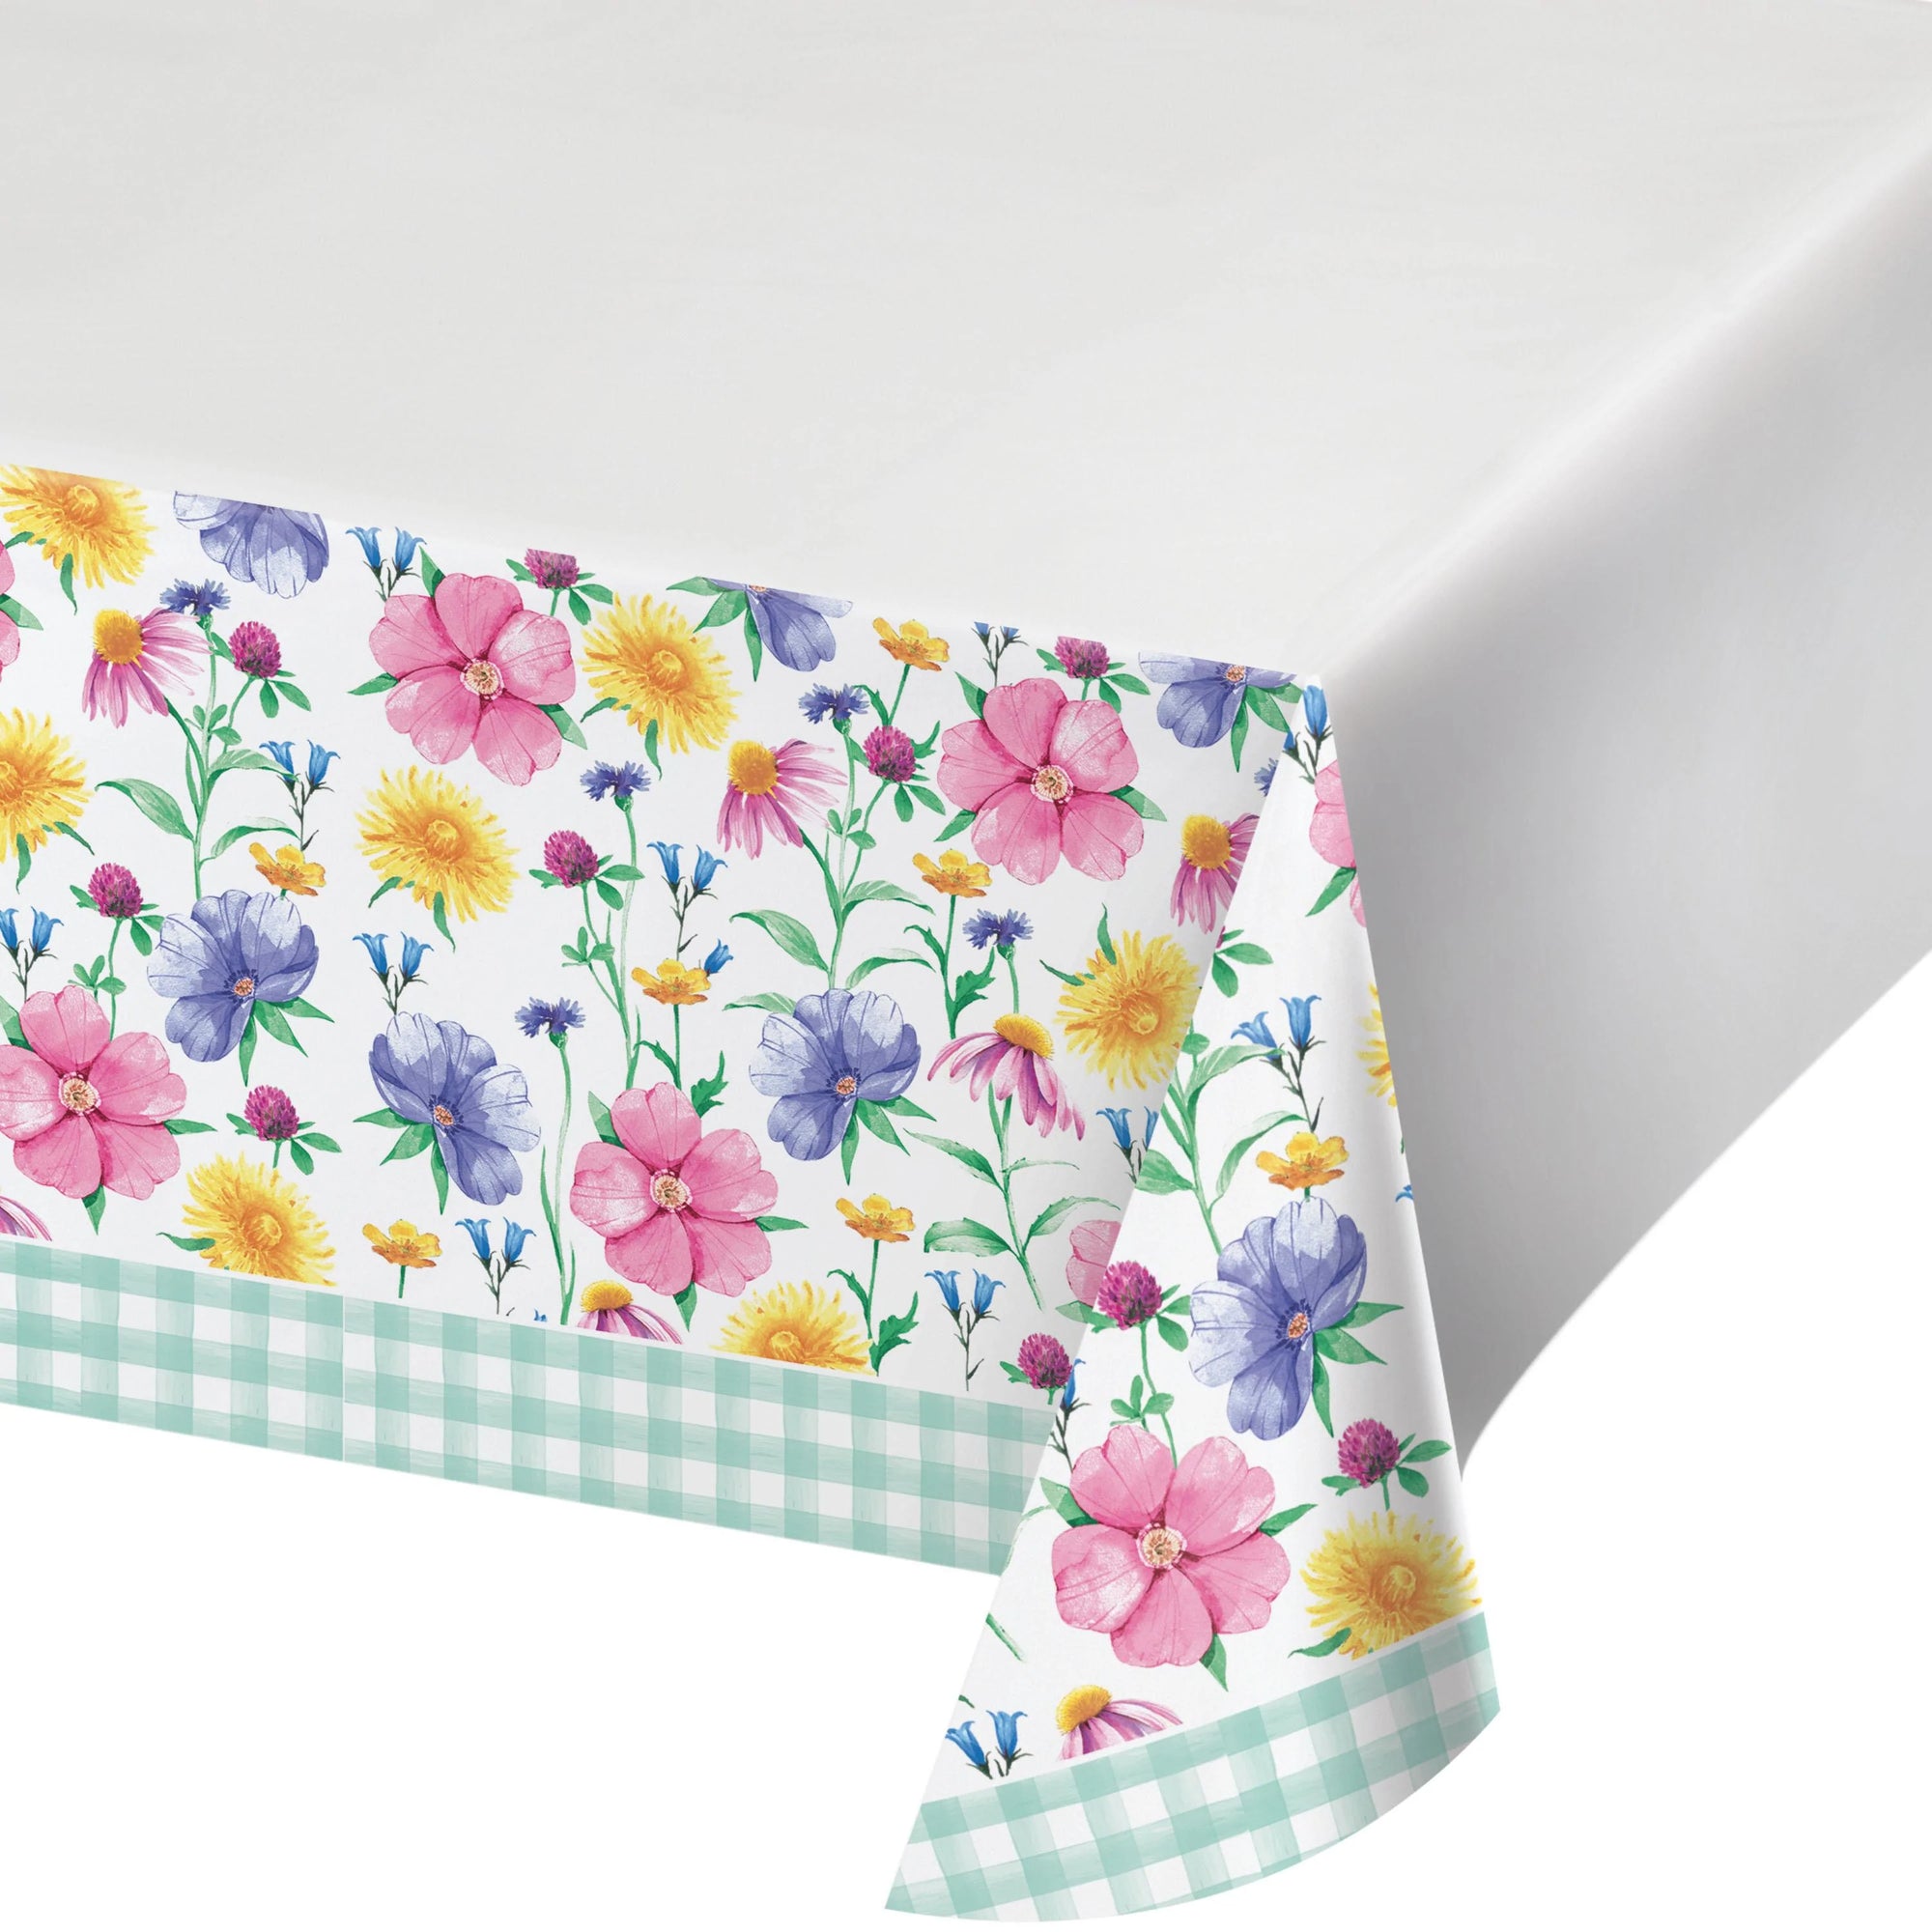 Bunny and Blooms Paper Tablecover Border Print, 54" x 102" by Creative Converting